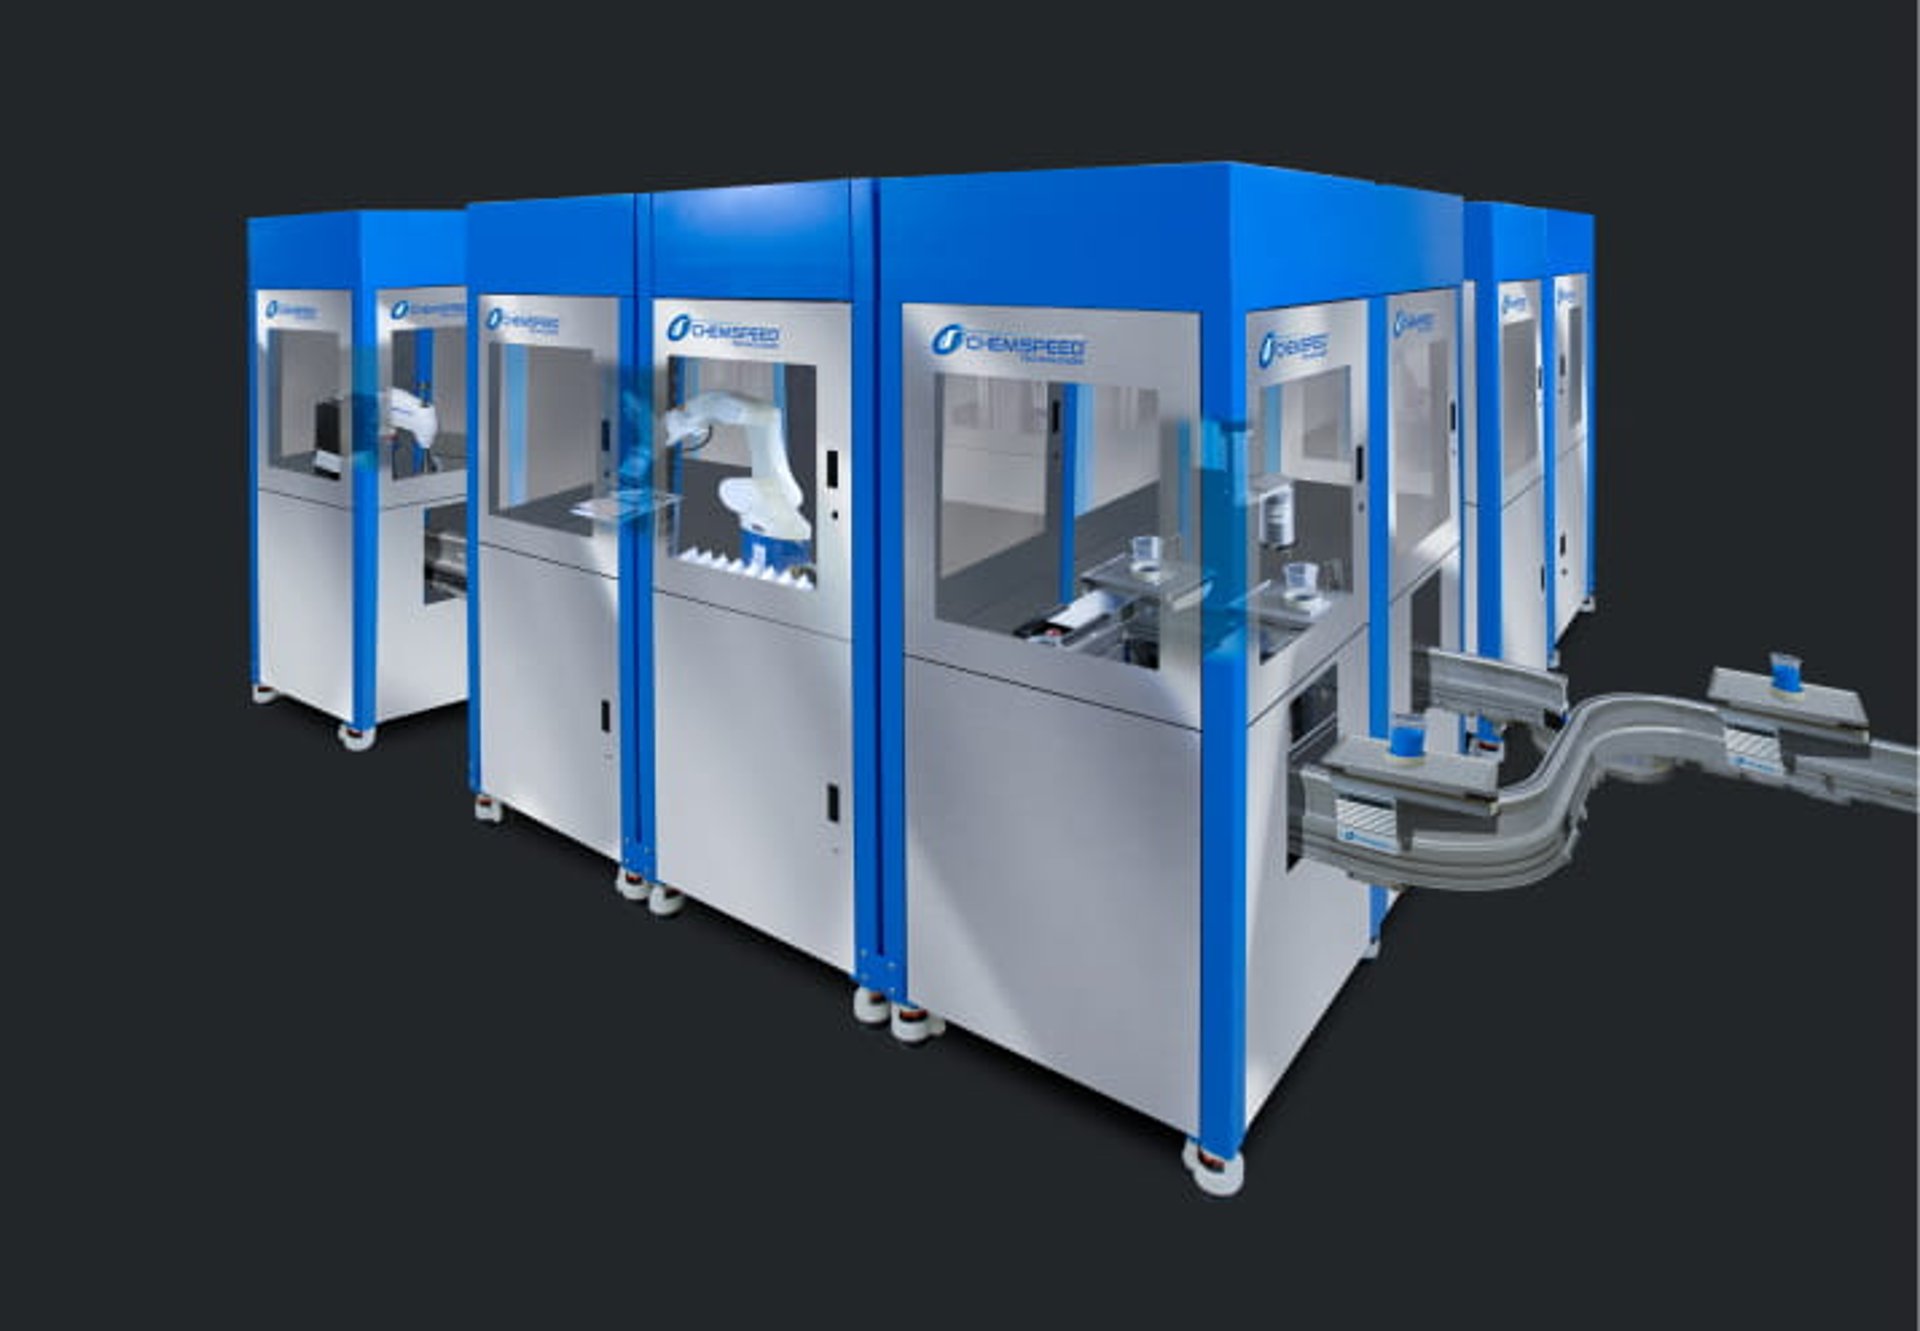 A Chemspeed Flexshuttle system with metal doors and blue edging containing multiple robot arms